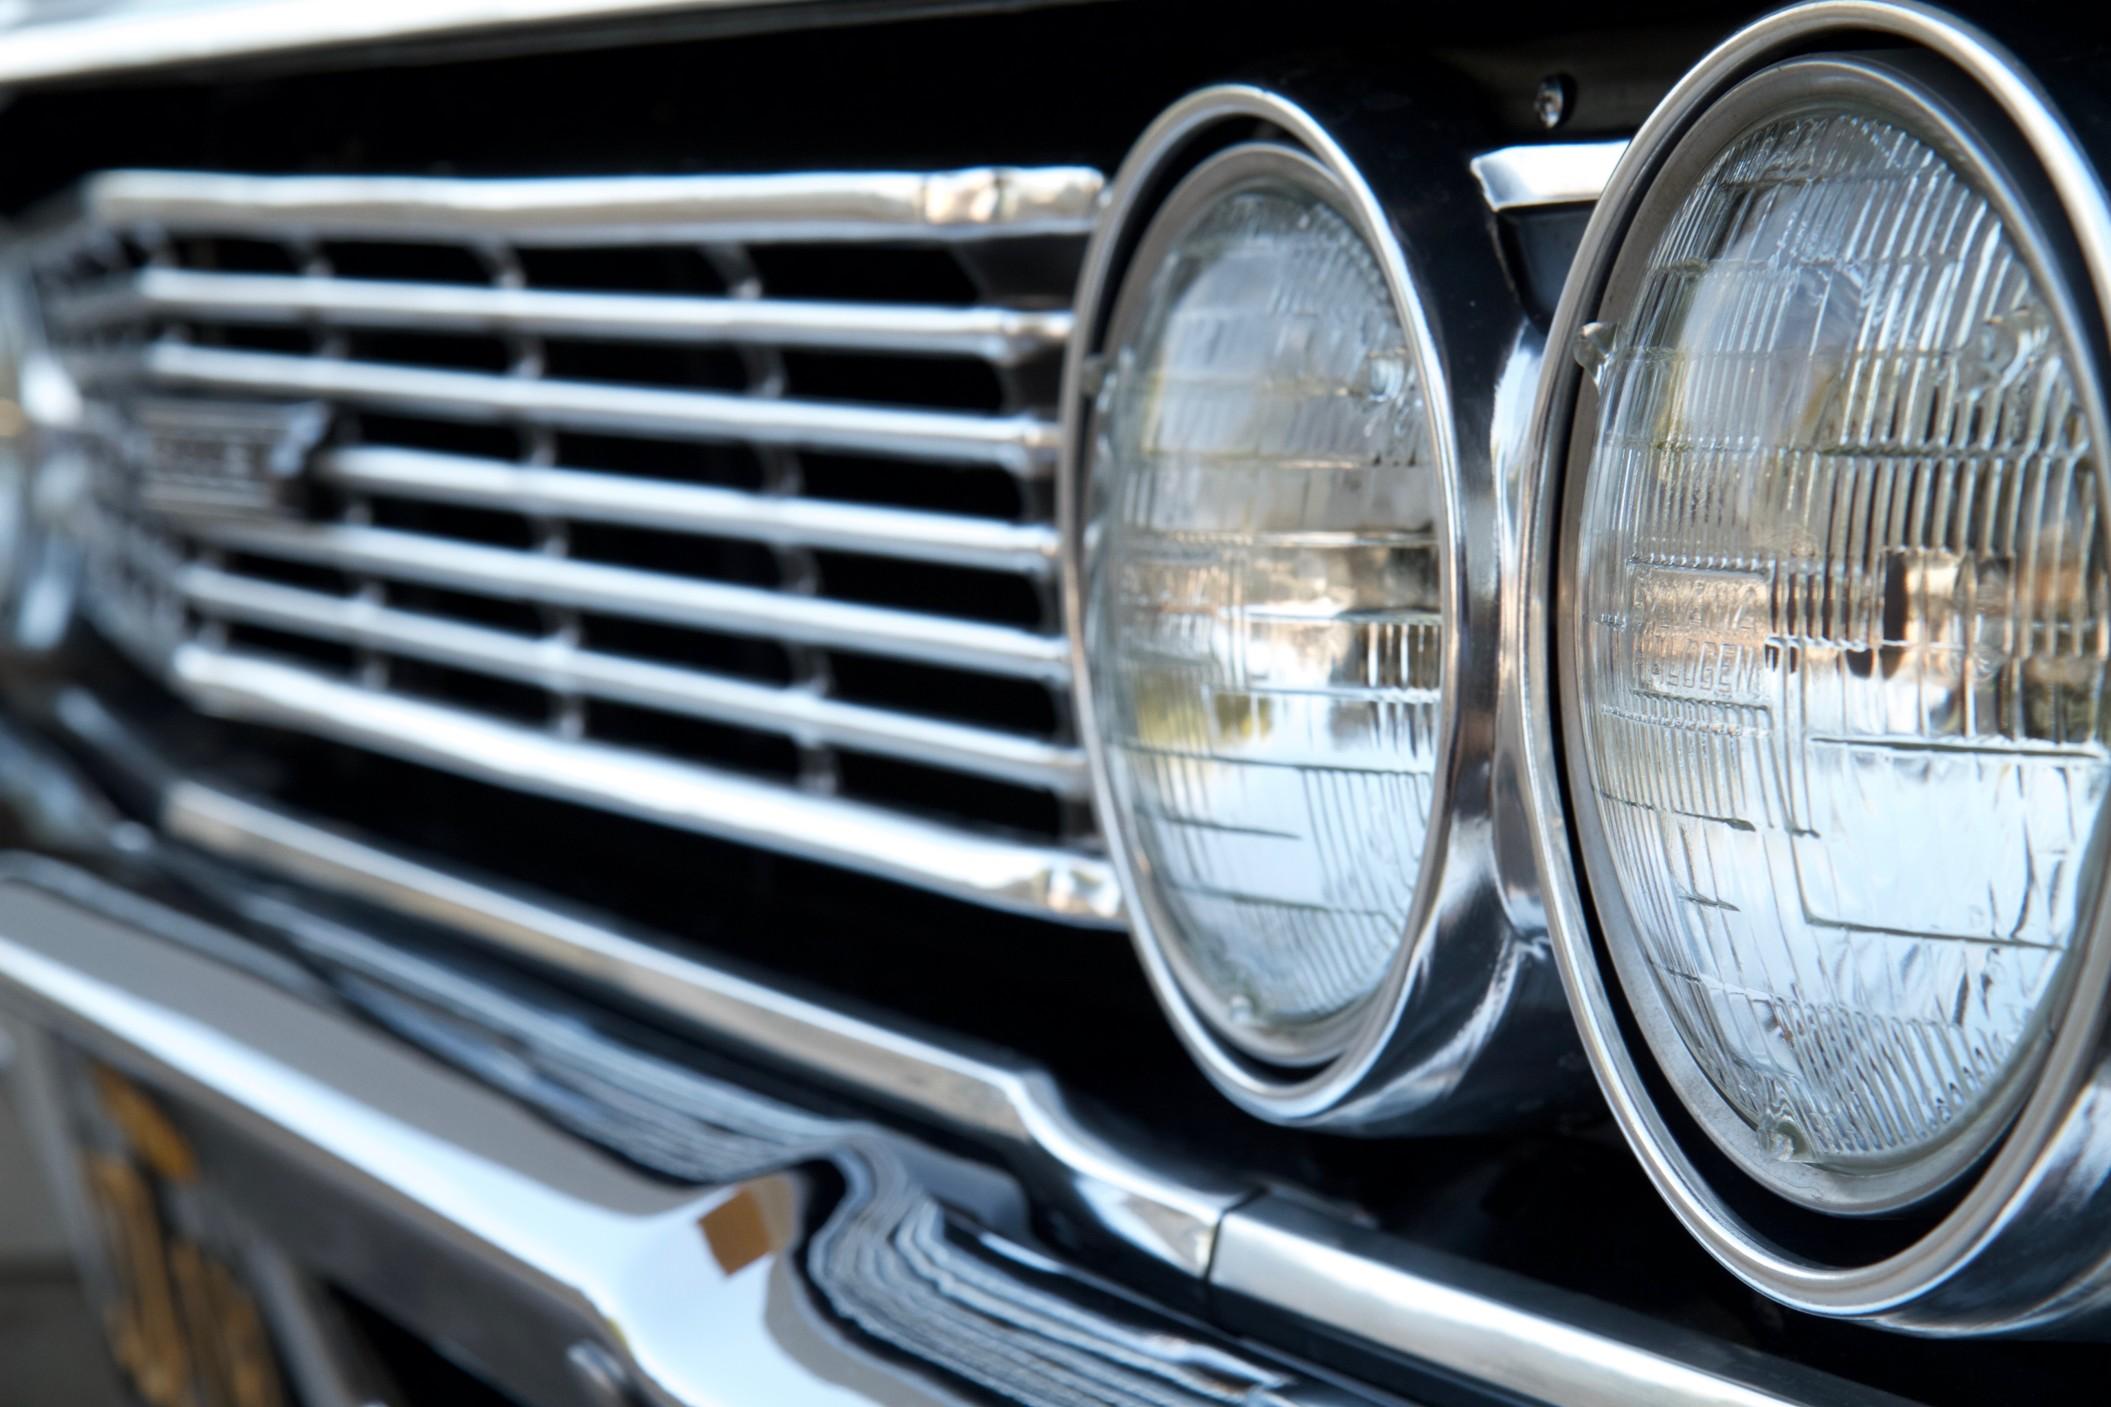 The 1968 Chevelle was powerful, reliable, and relatively affordable.